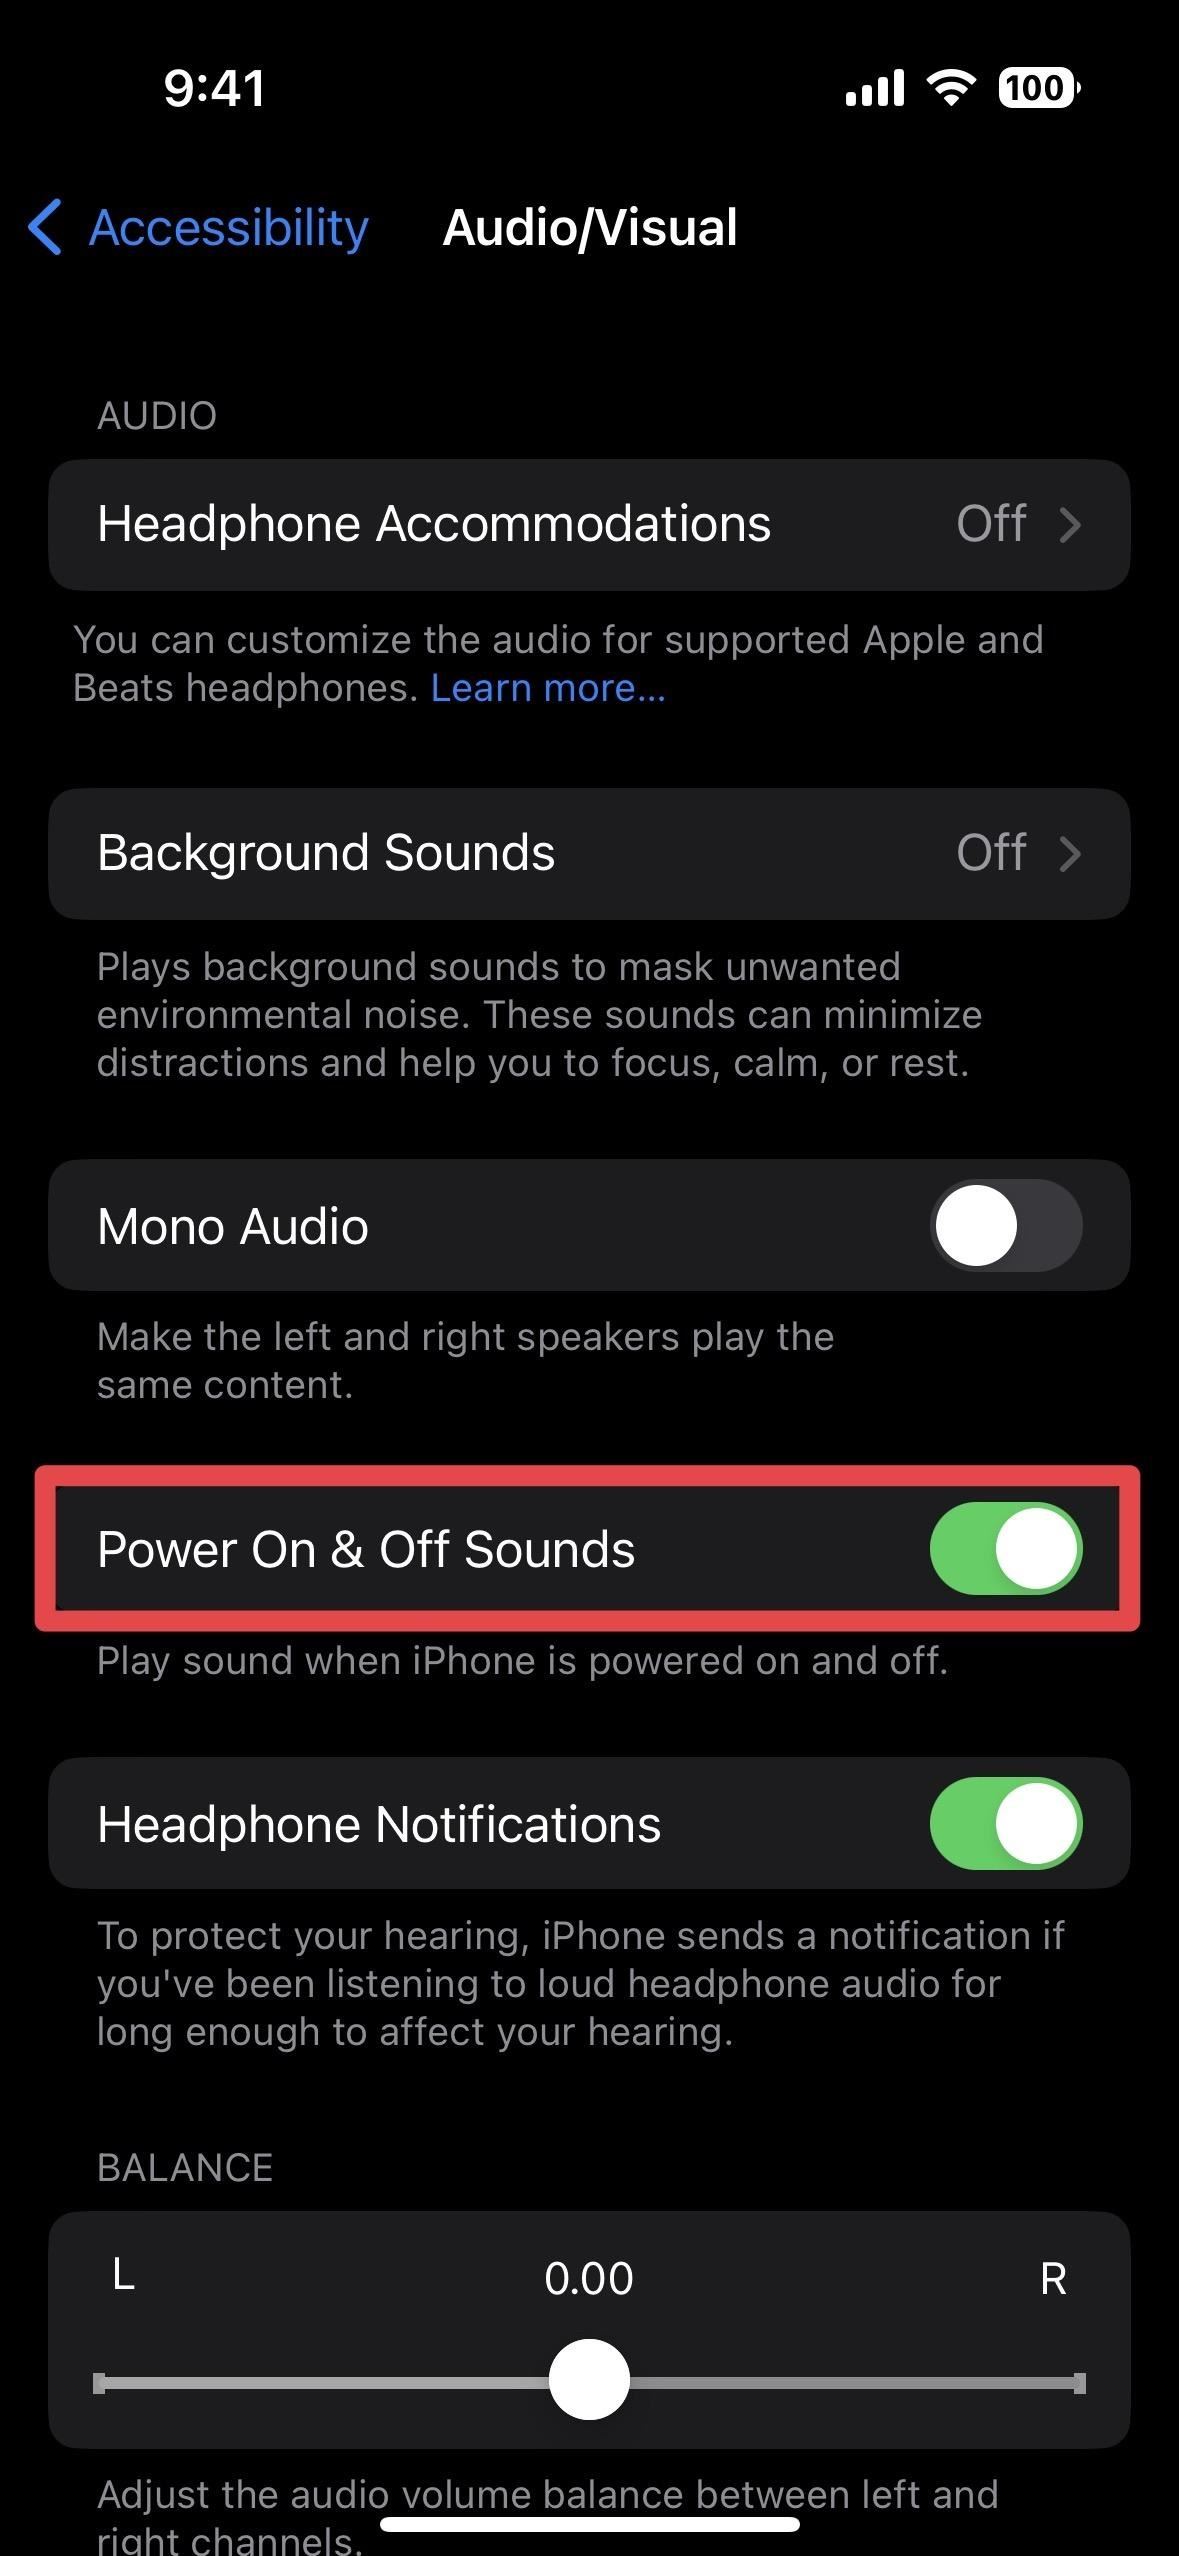 Give Your iPhone Mac-Like Shutdown and Startup Chimes So You Know When It Powers Off and On